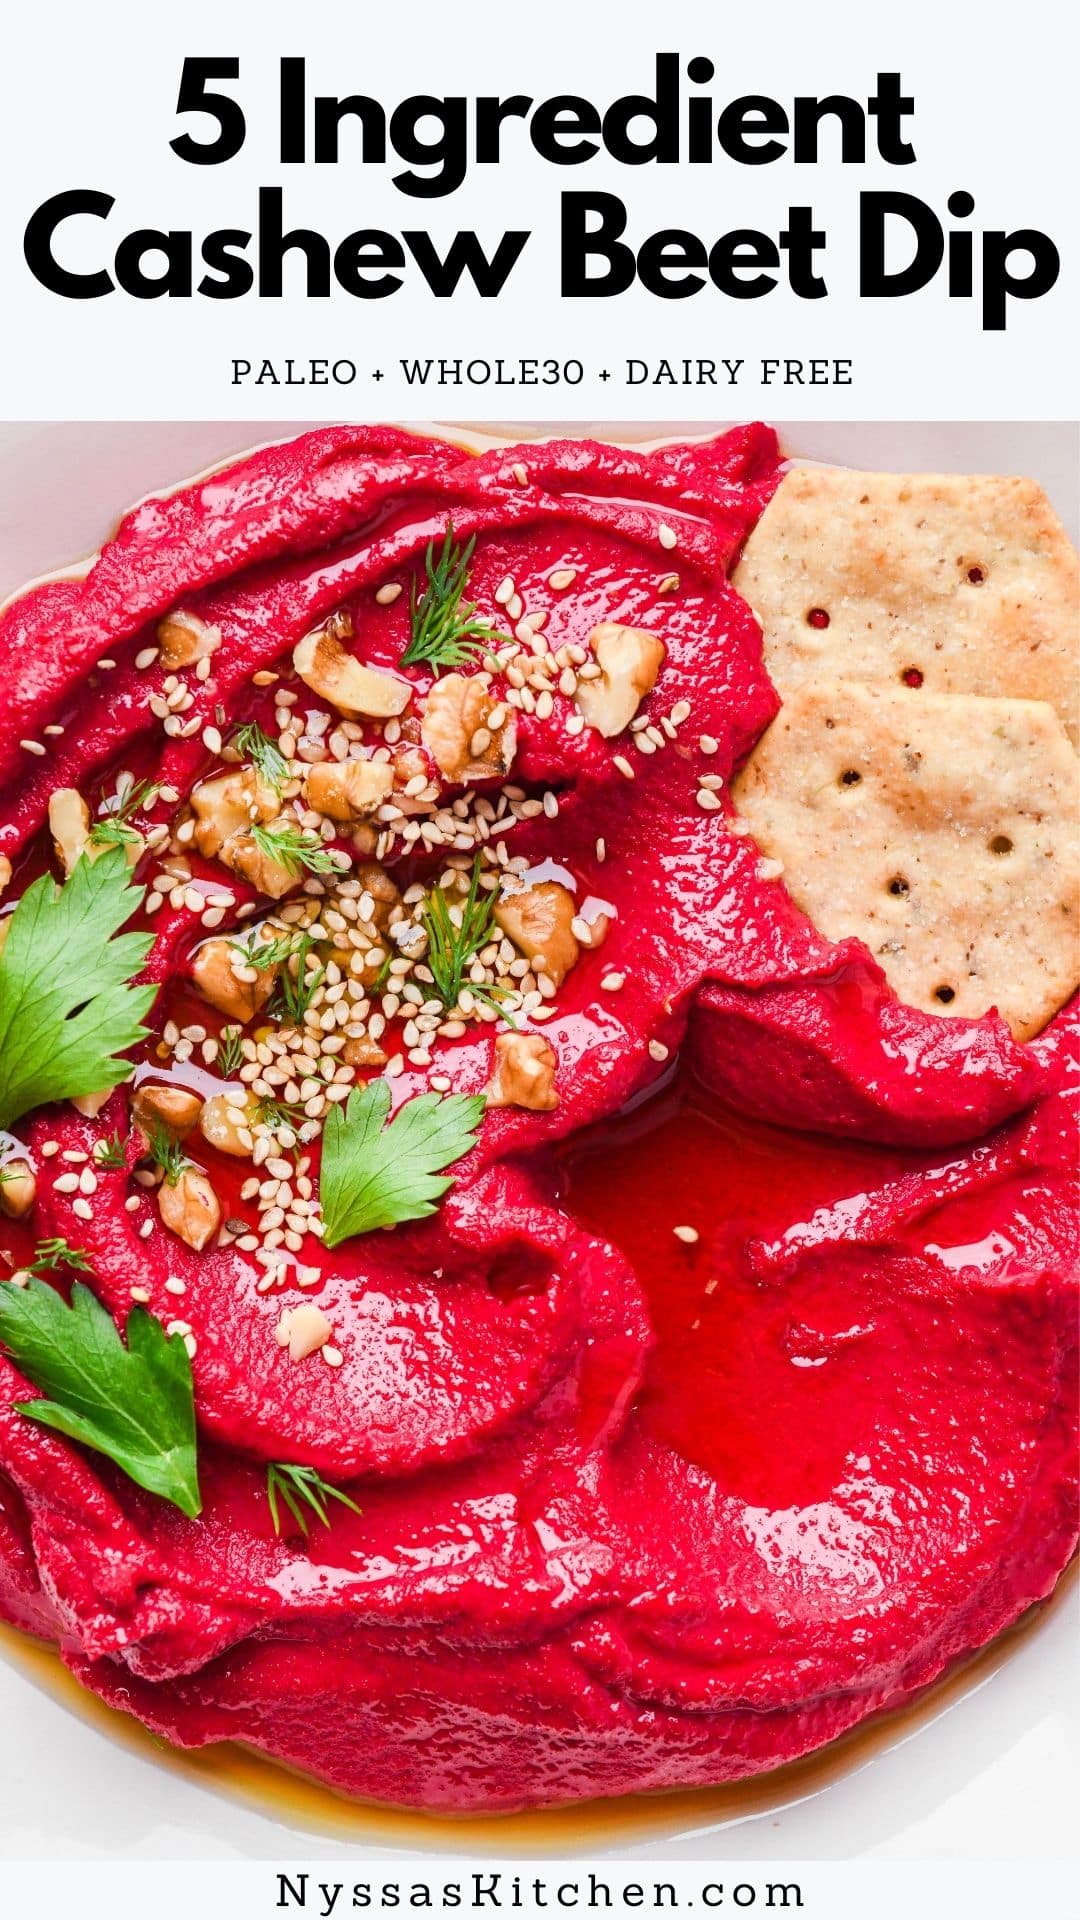 This 5 ingredient cashew beet dip is here to rock your snack loving world in the most delicious way. Besides being such a pretty shade of pink it's also full of good for you ingredients like beets, cashews, garlic, red wine vinegar and salt. THAT'S IT! Super easy and very tasty. Paleo, vegan, whole30, dairy free, and gluten free.